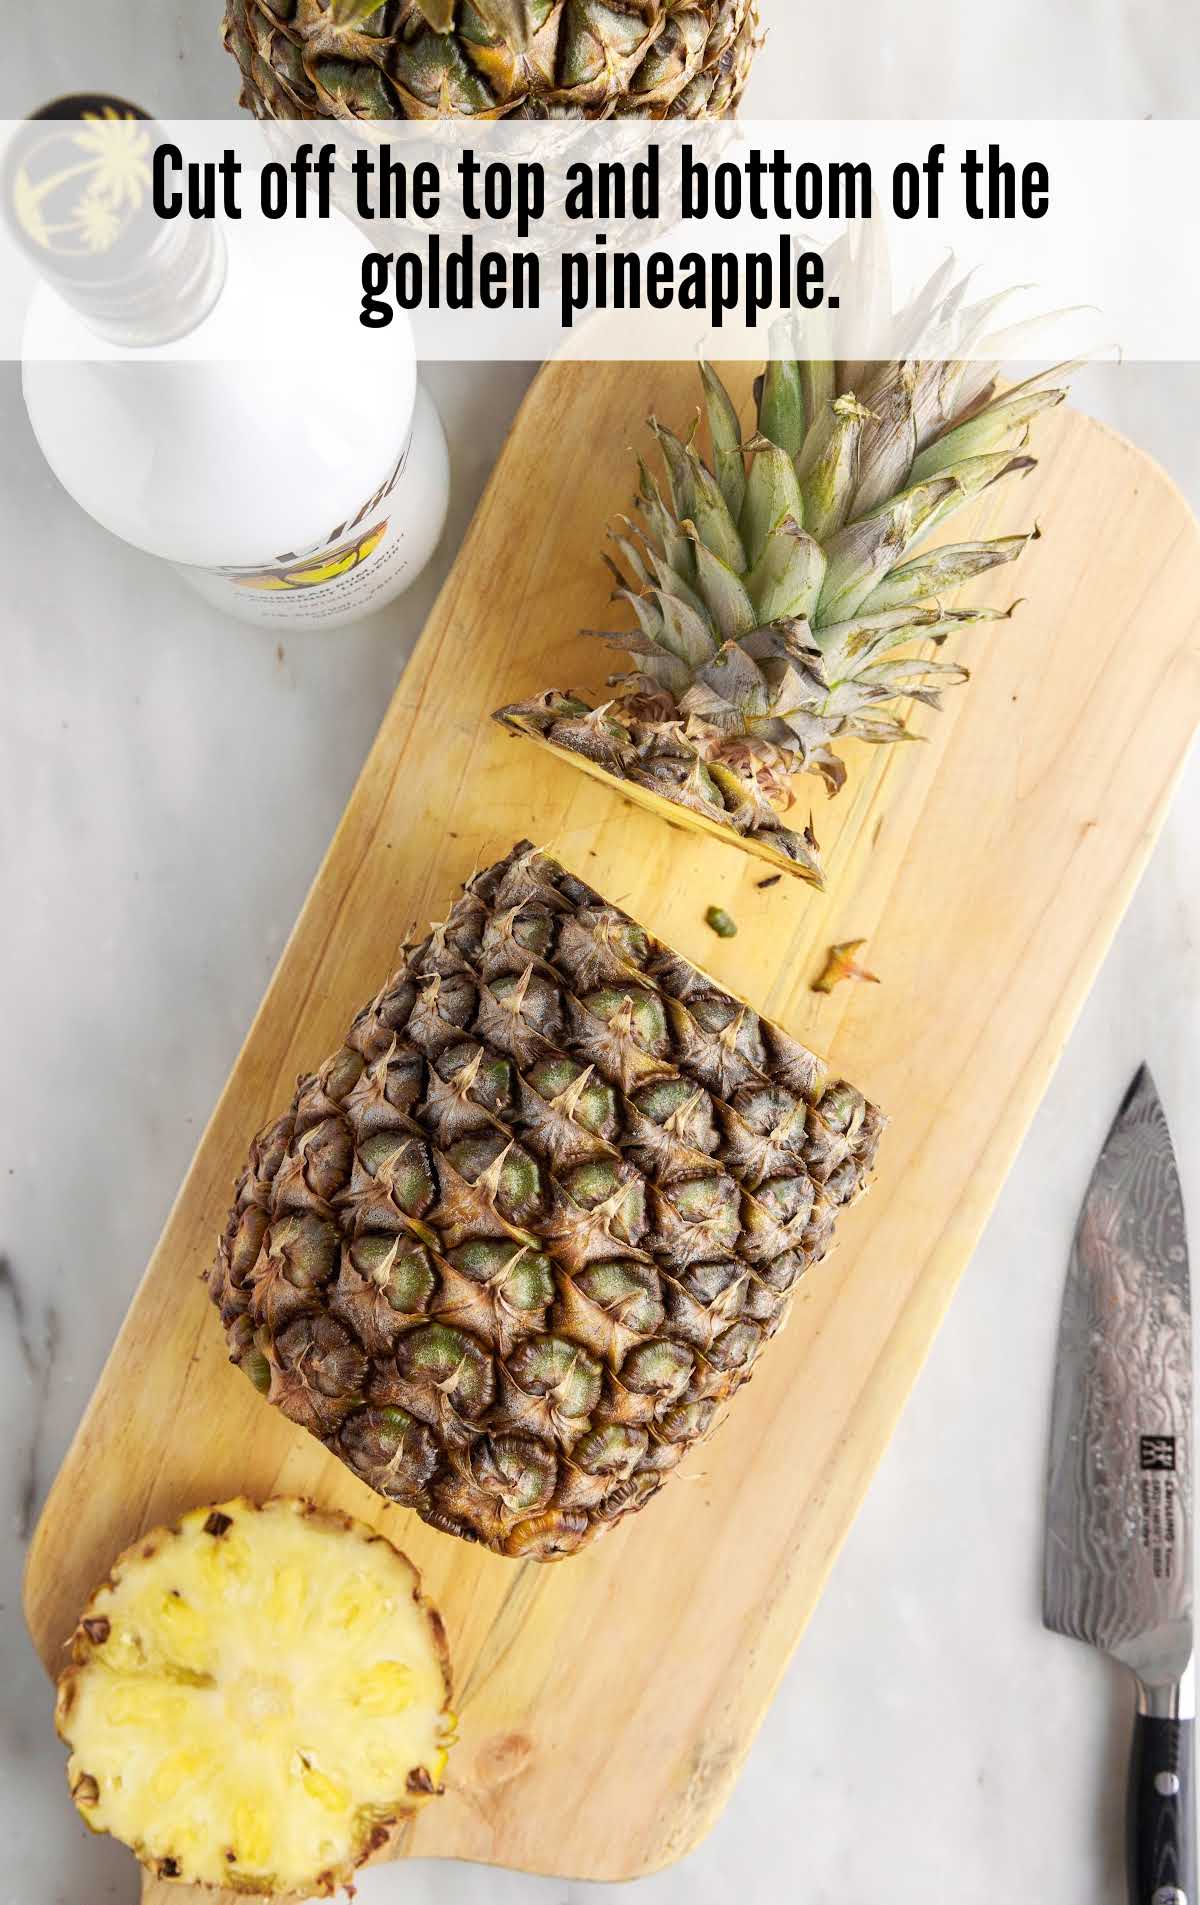 A banana sitting on top of a wooden cutting board, with Pineapple and Malibu